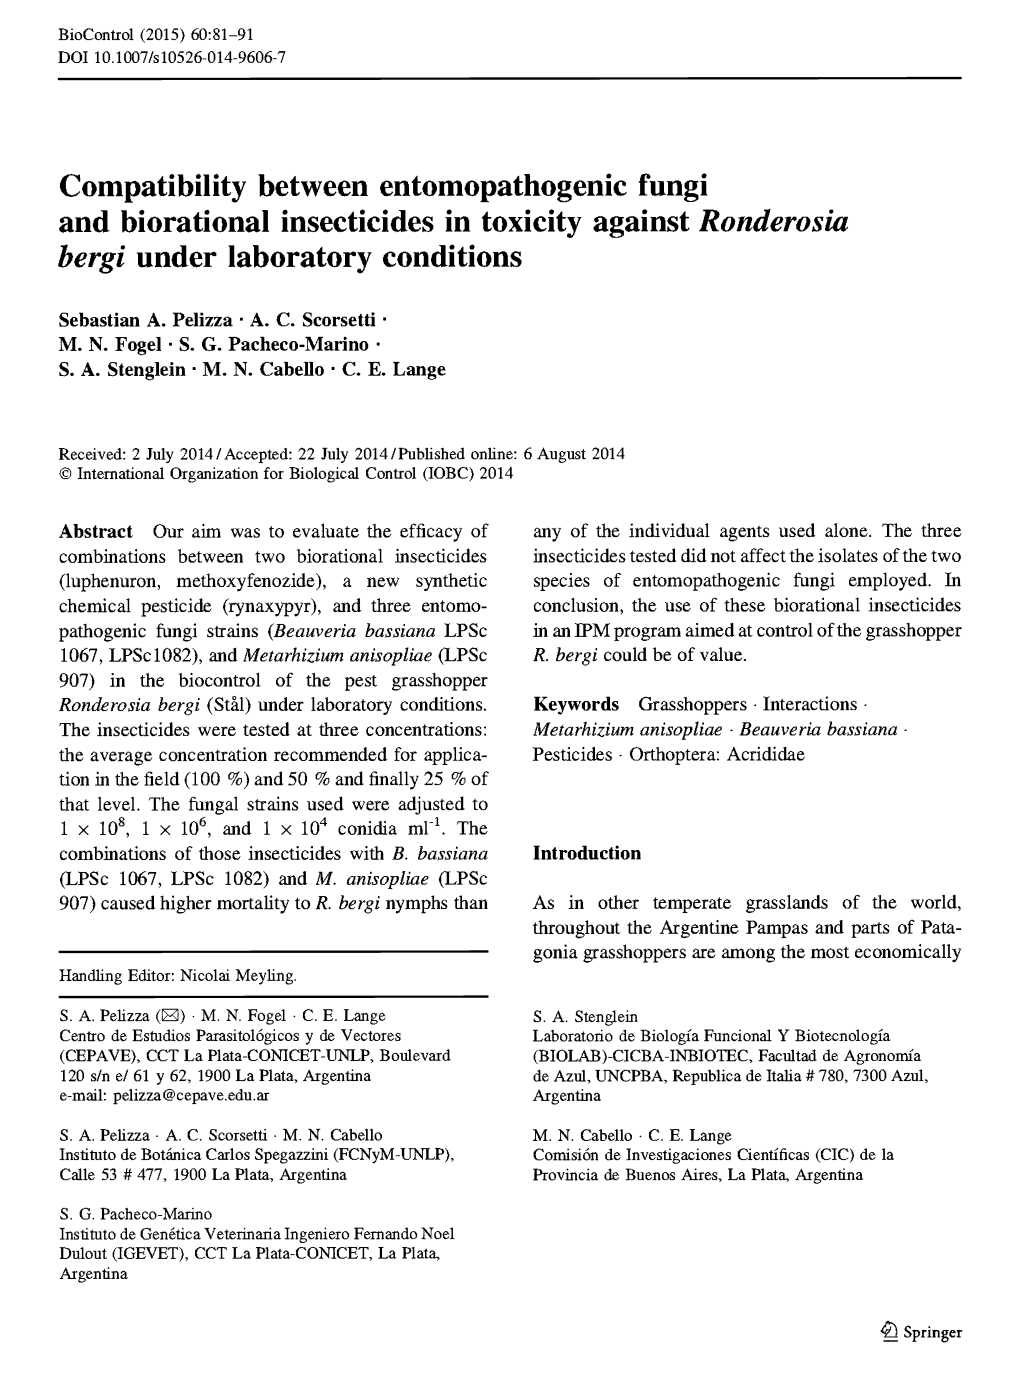 Compatibility Between Entomopathogenic Fungi and Biorational Insecticides in Toxicity Against Ronderosia, Bergi Under Laboratory Conditions